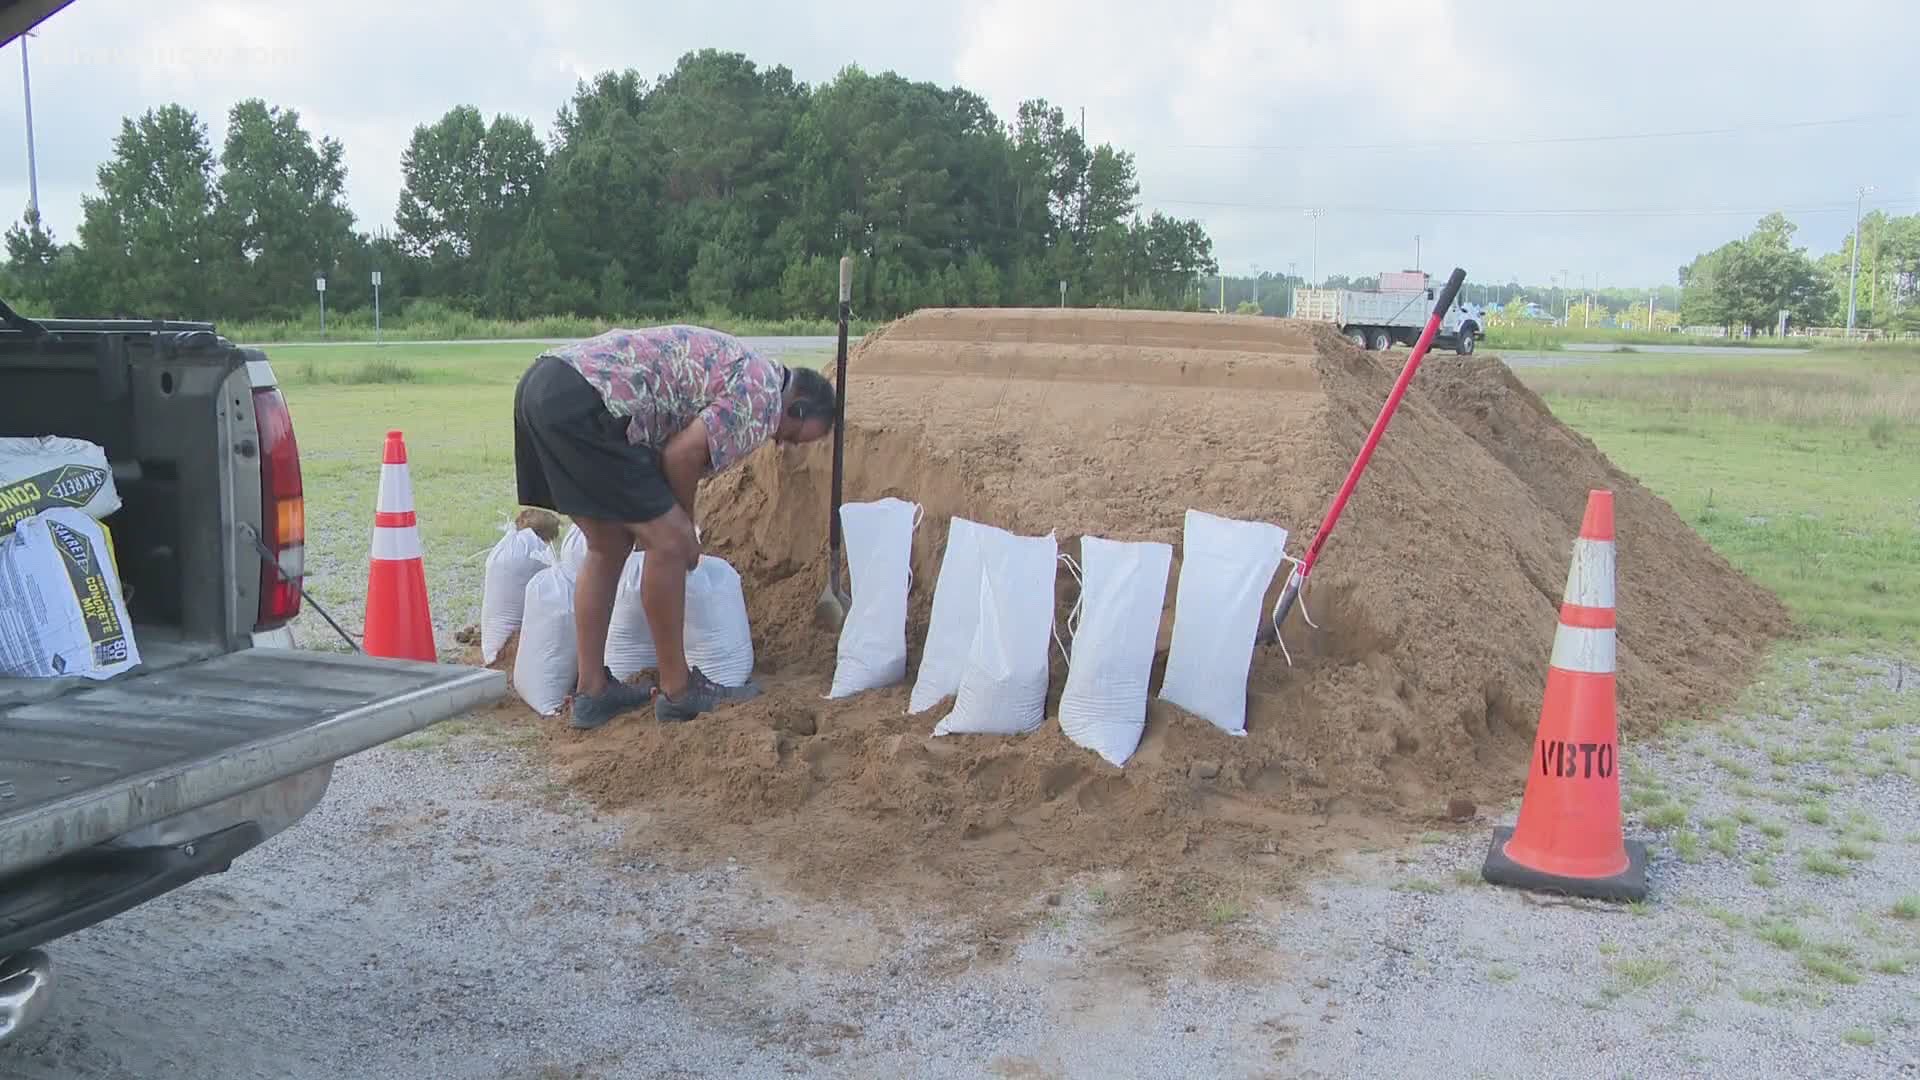 People had to bring their own bags and shovel to gather the sand. The hope is that it will keep homes safe from flooding.